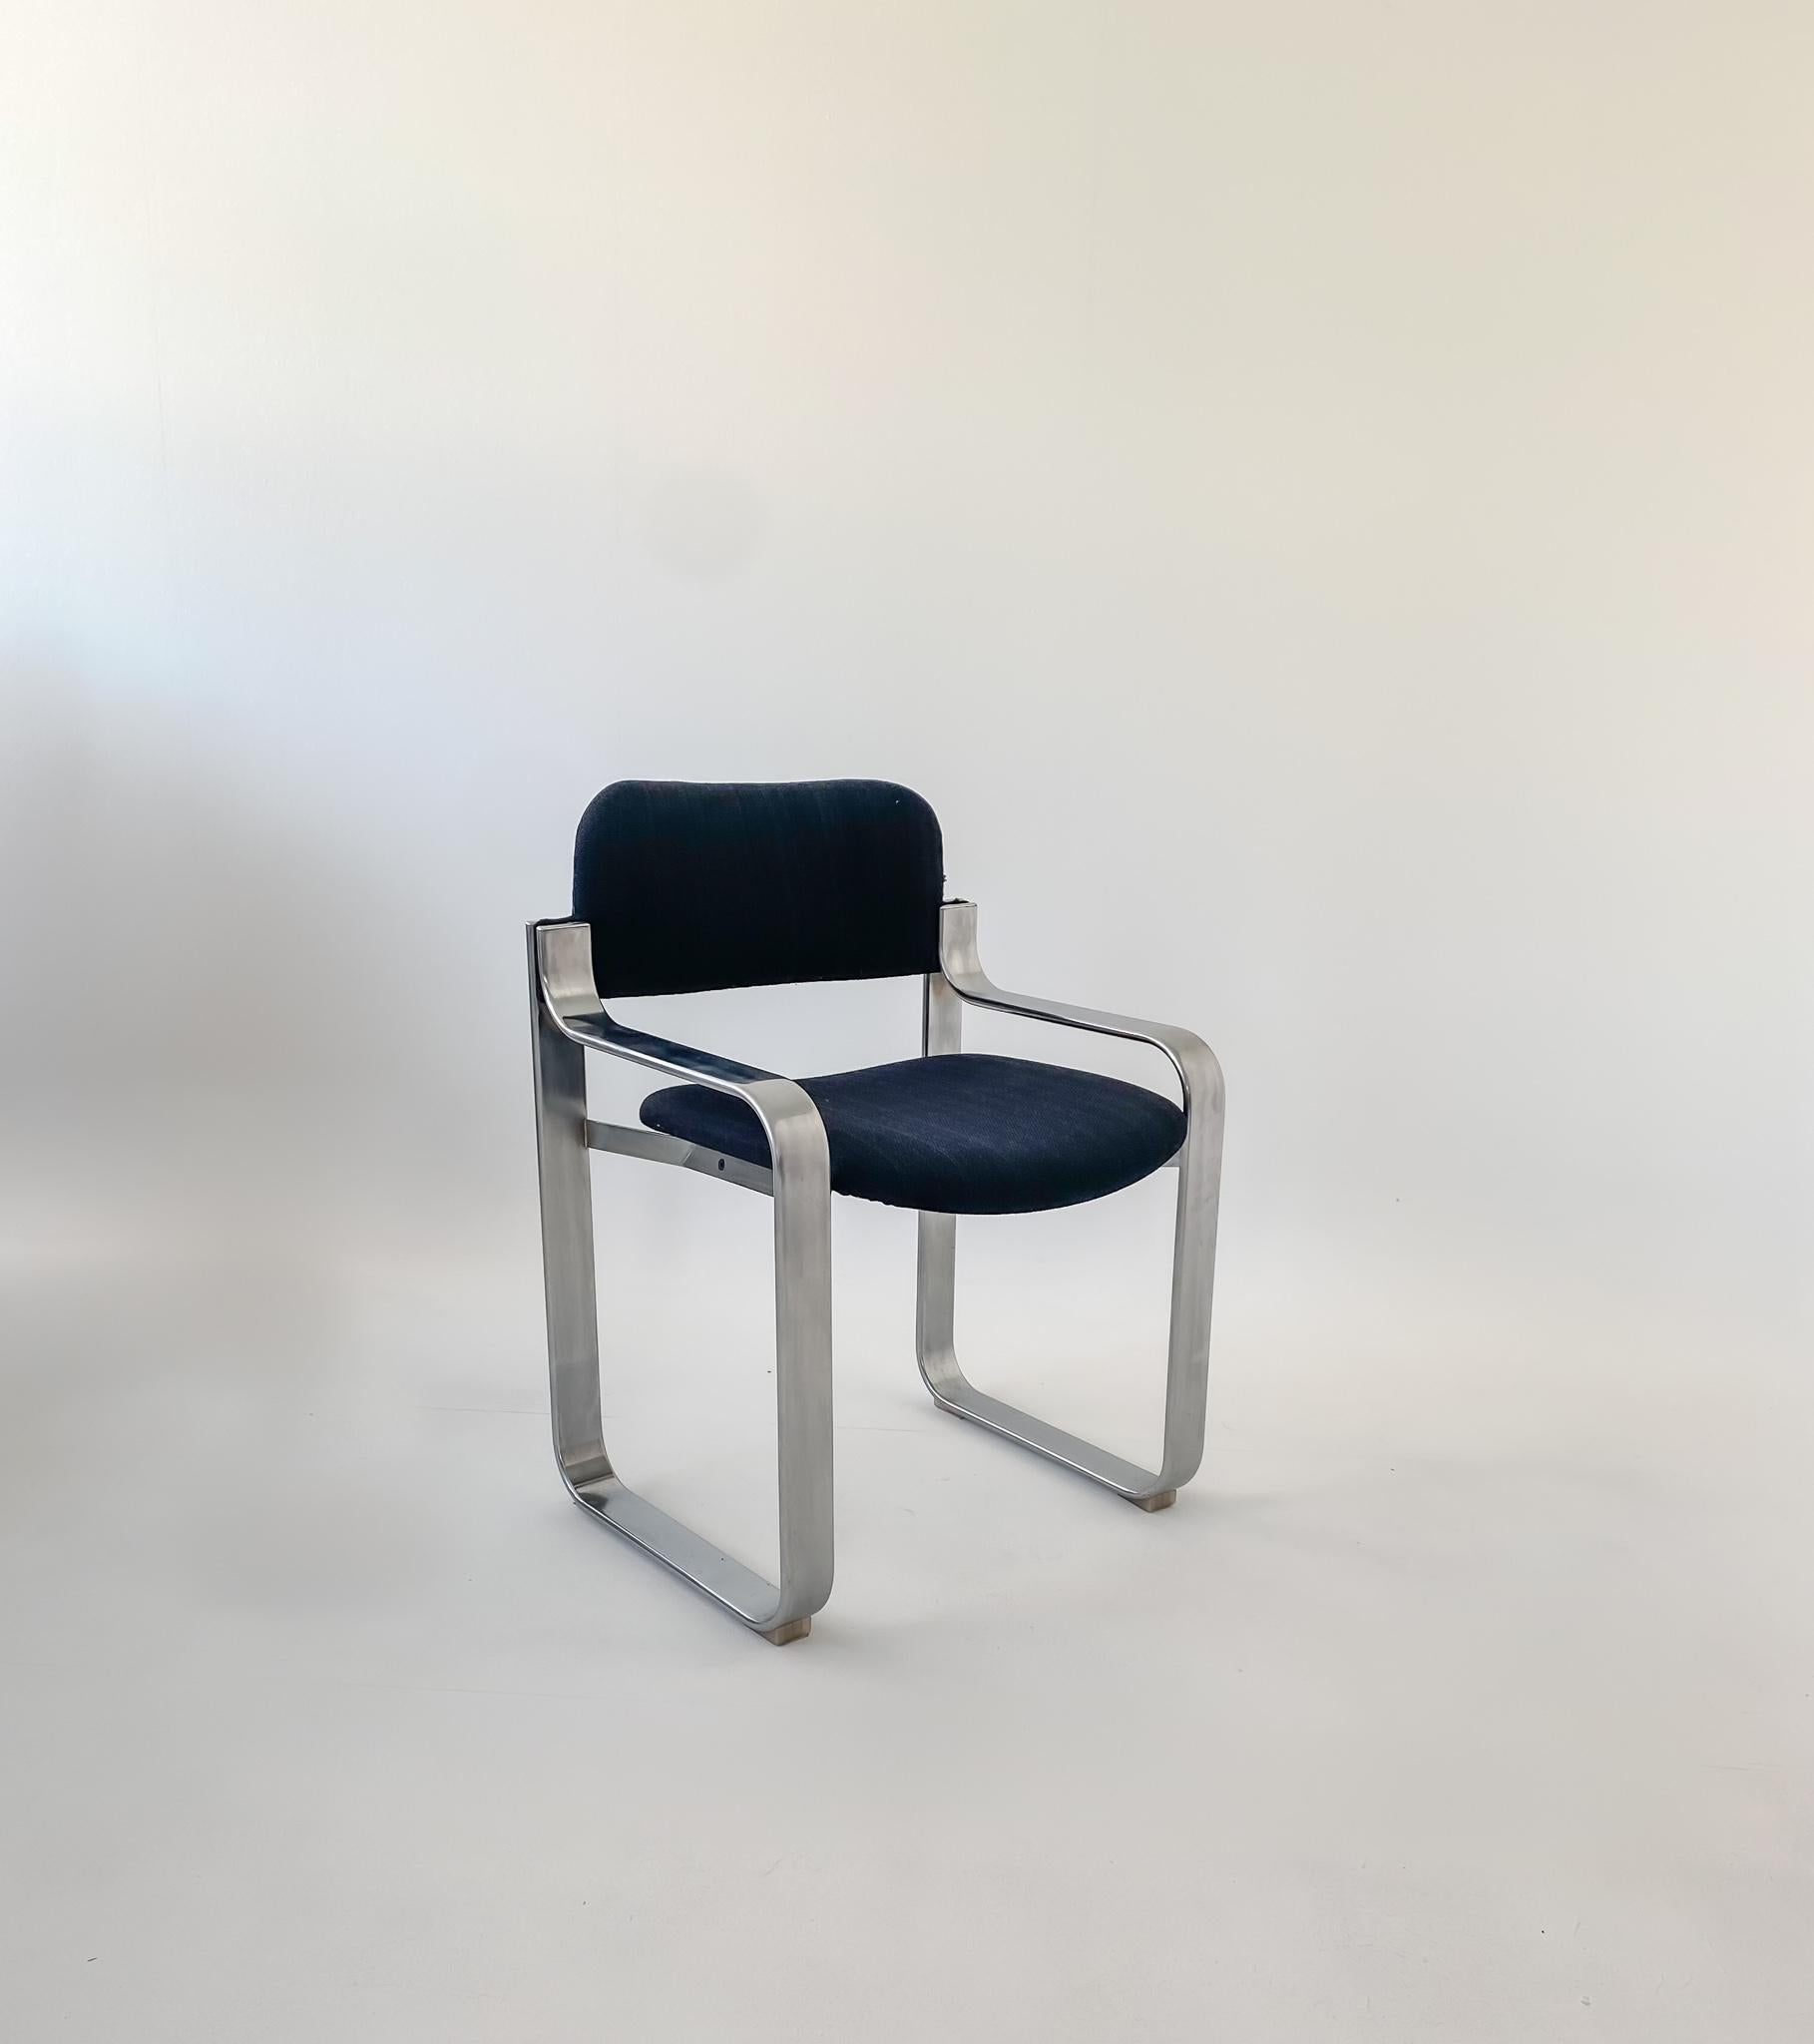 Mid-Century Modern Black Metal Armchair by Eero Aarnio for Mobile Italia, 1970s.

Due to its uniquely curved metal frame, this black armchair is immediately recognisable as a masterpiece designed by Finnish designer Eero Aarnio. This rare armchair